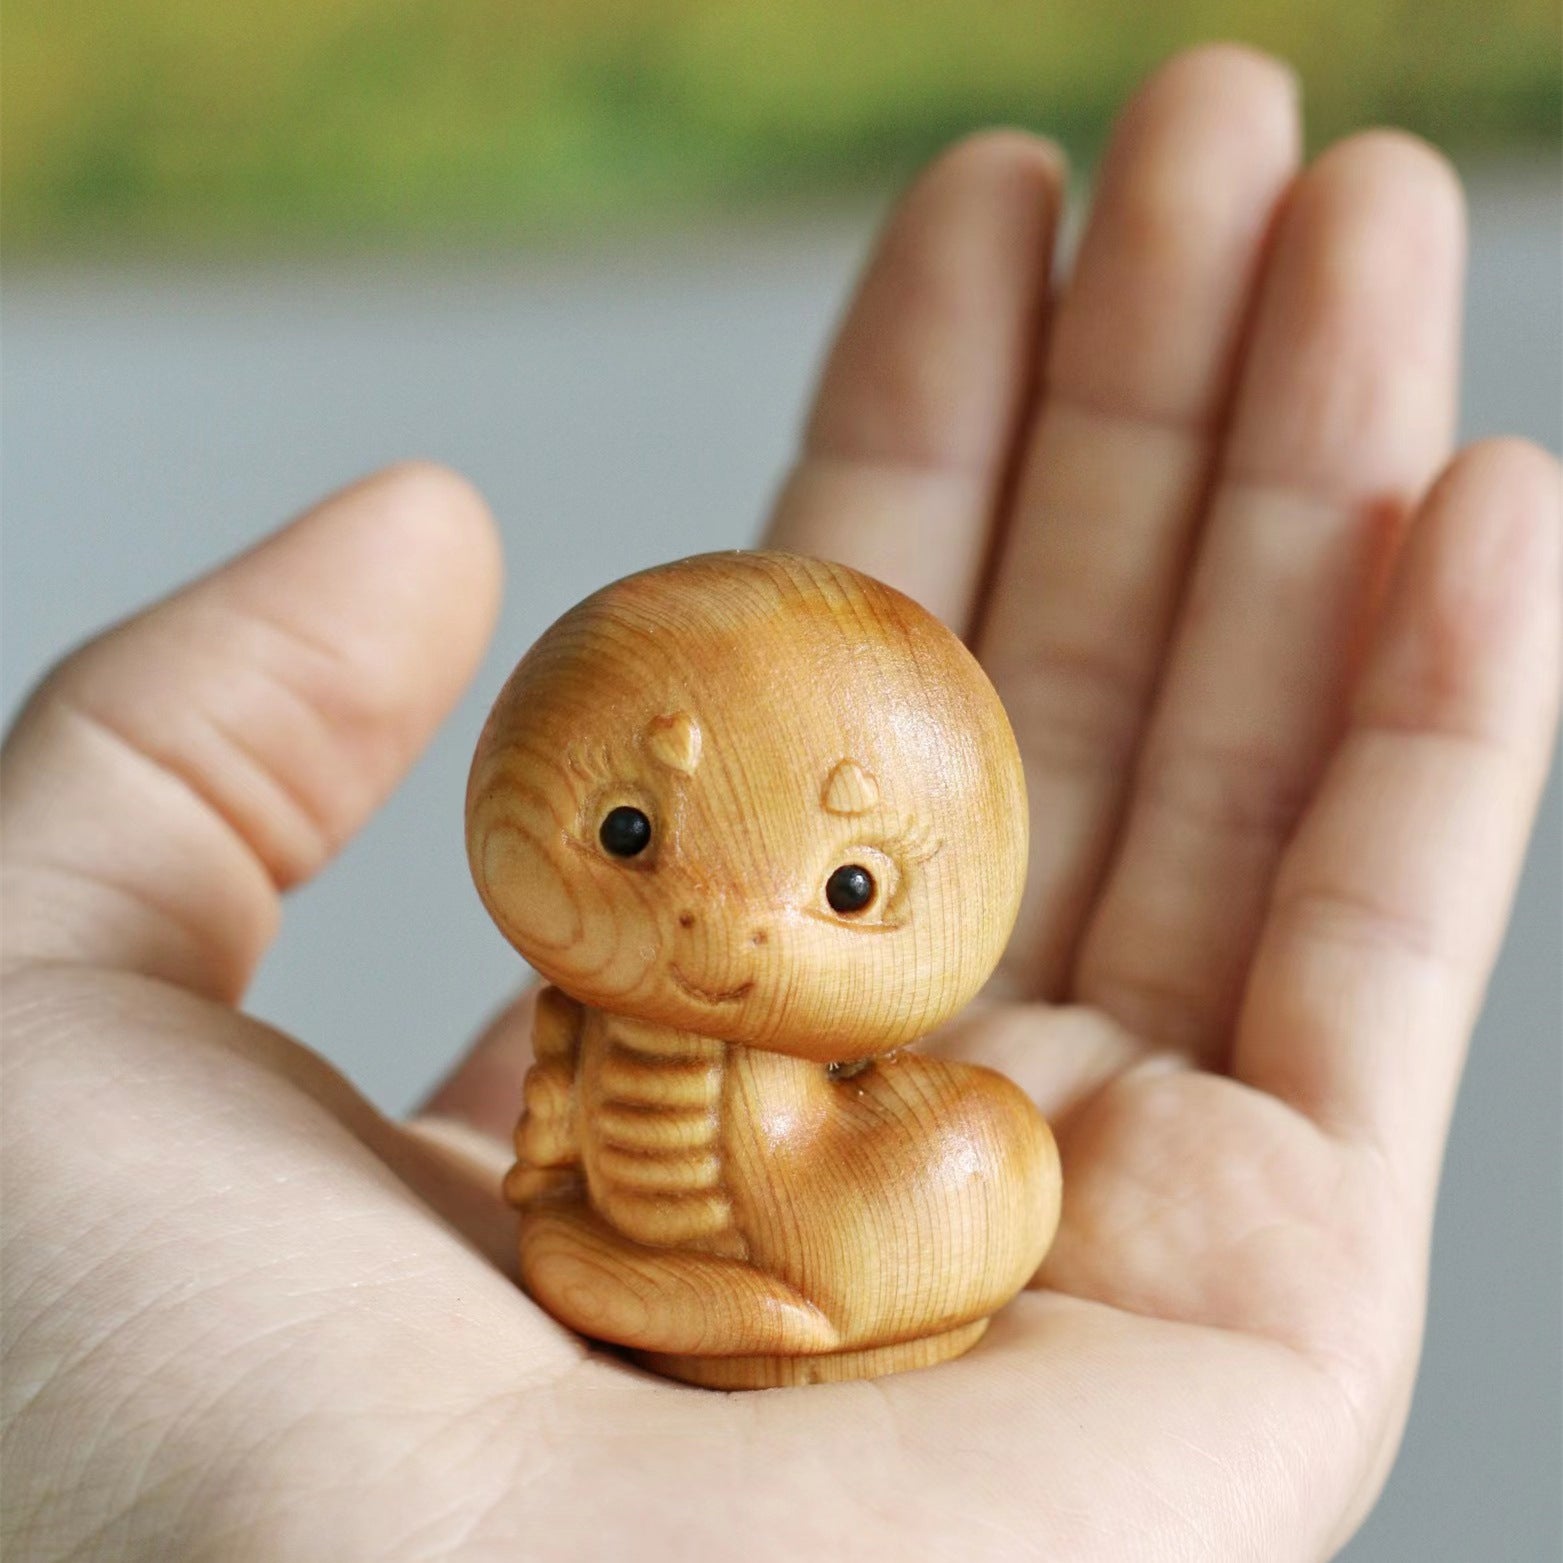 a small wooden toy sitting on top of a person's hand